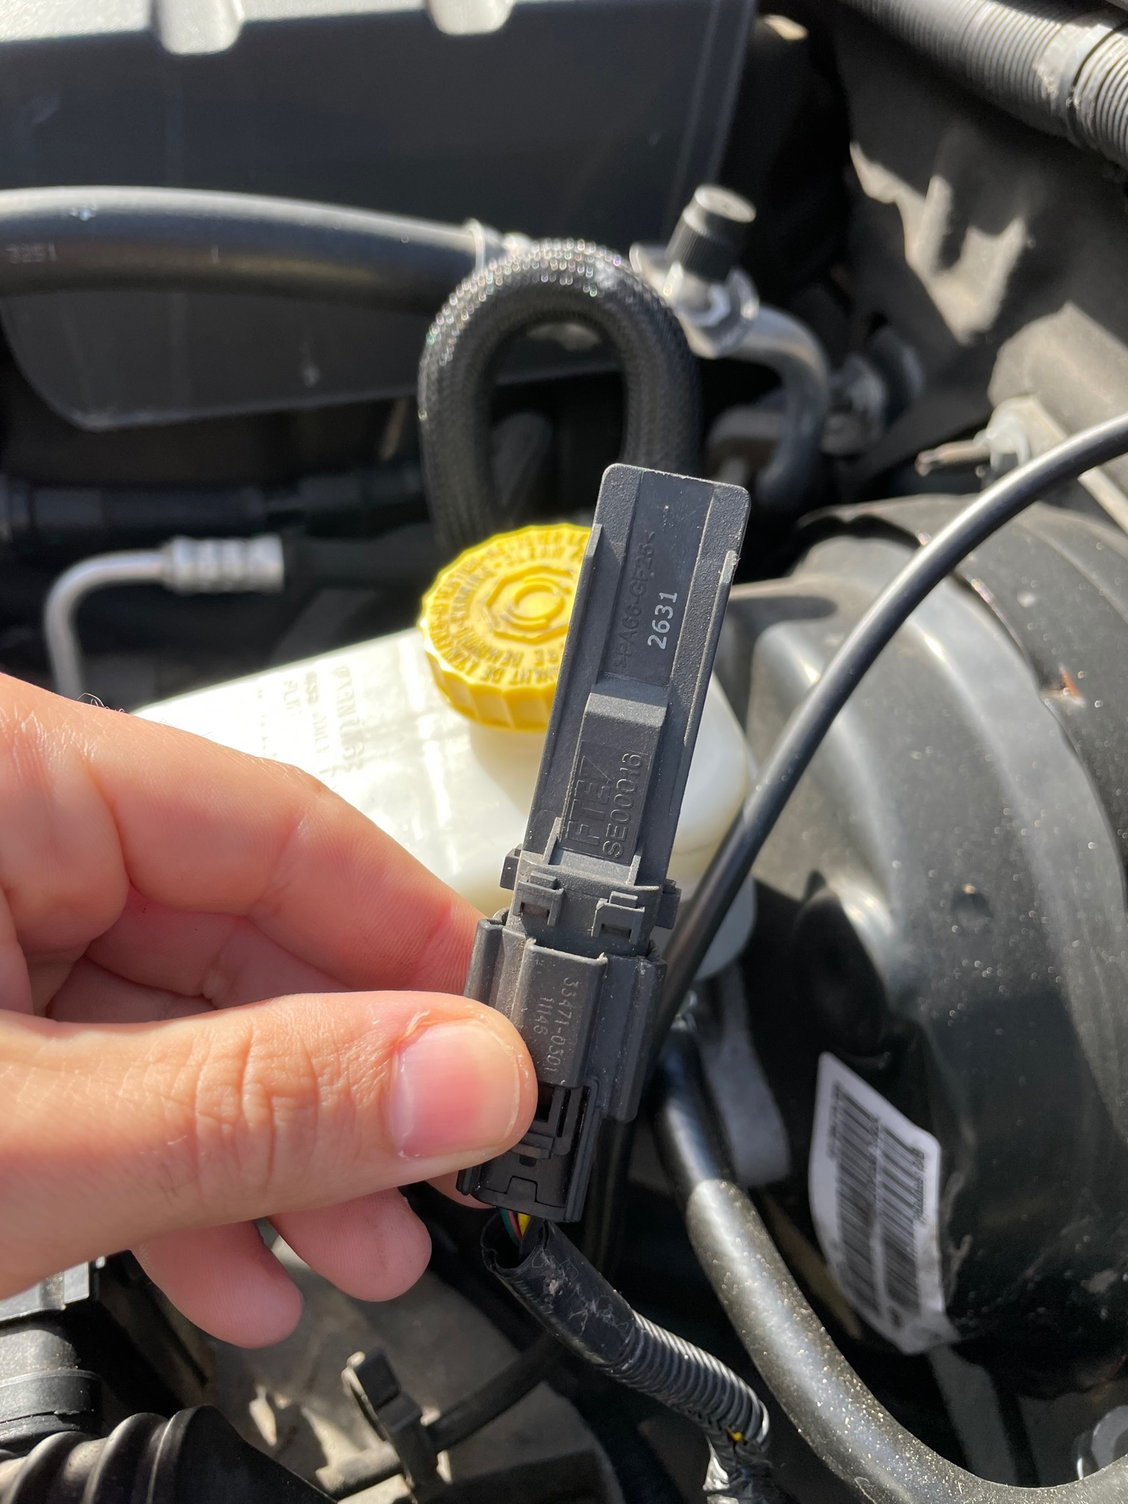 No Start Clutch Safety Switch  - The top destination for Jeep  JK and JL Wrangler news, rumors, and discussion